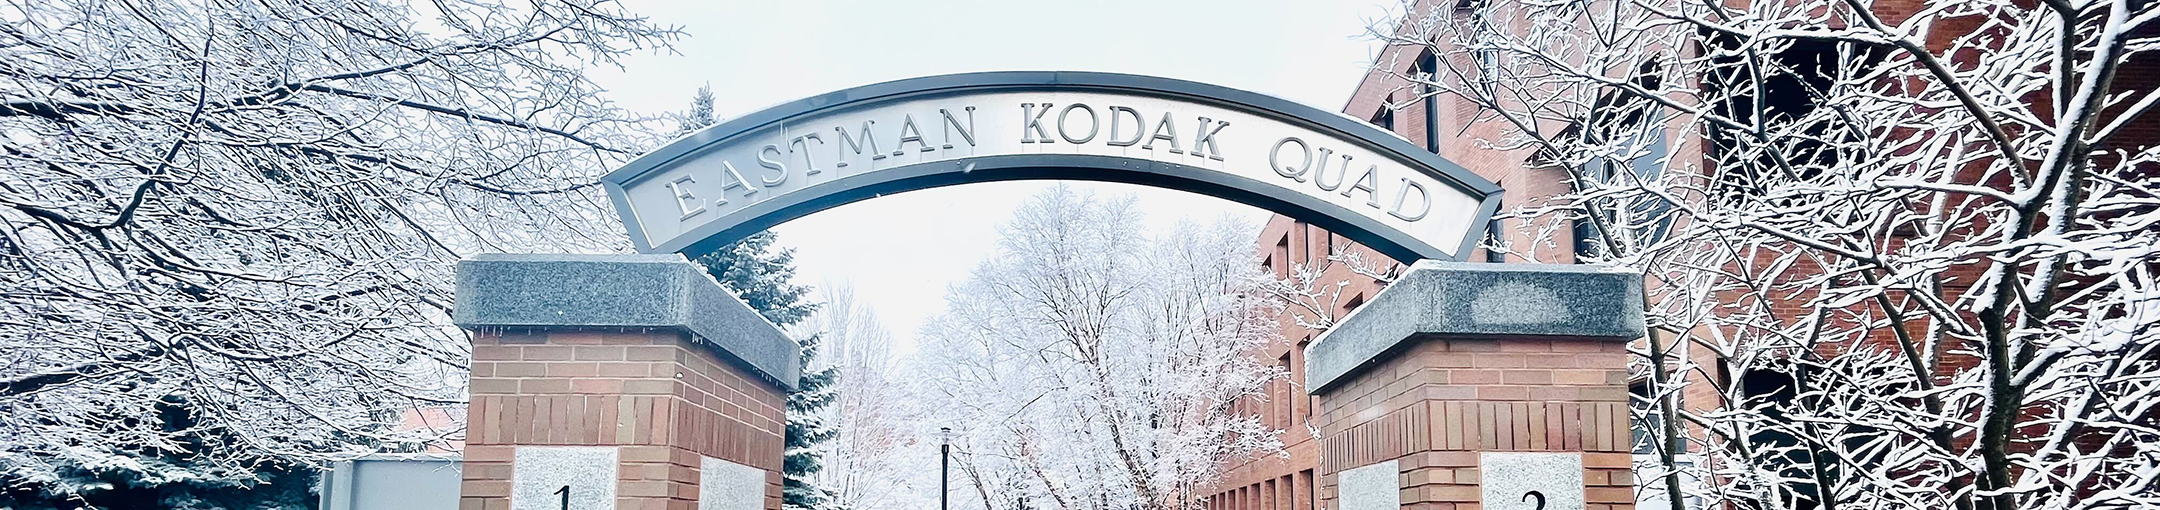 an arch that says Eastman Kodak Quad on it covered in snow